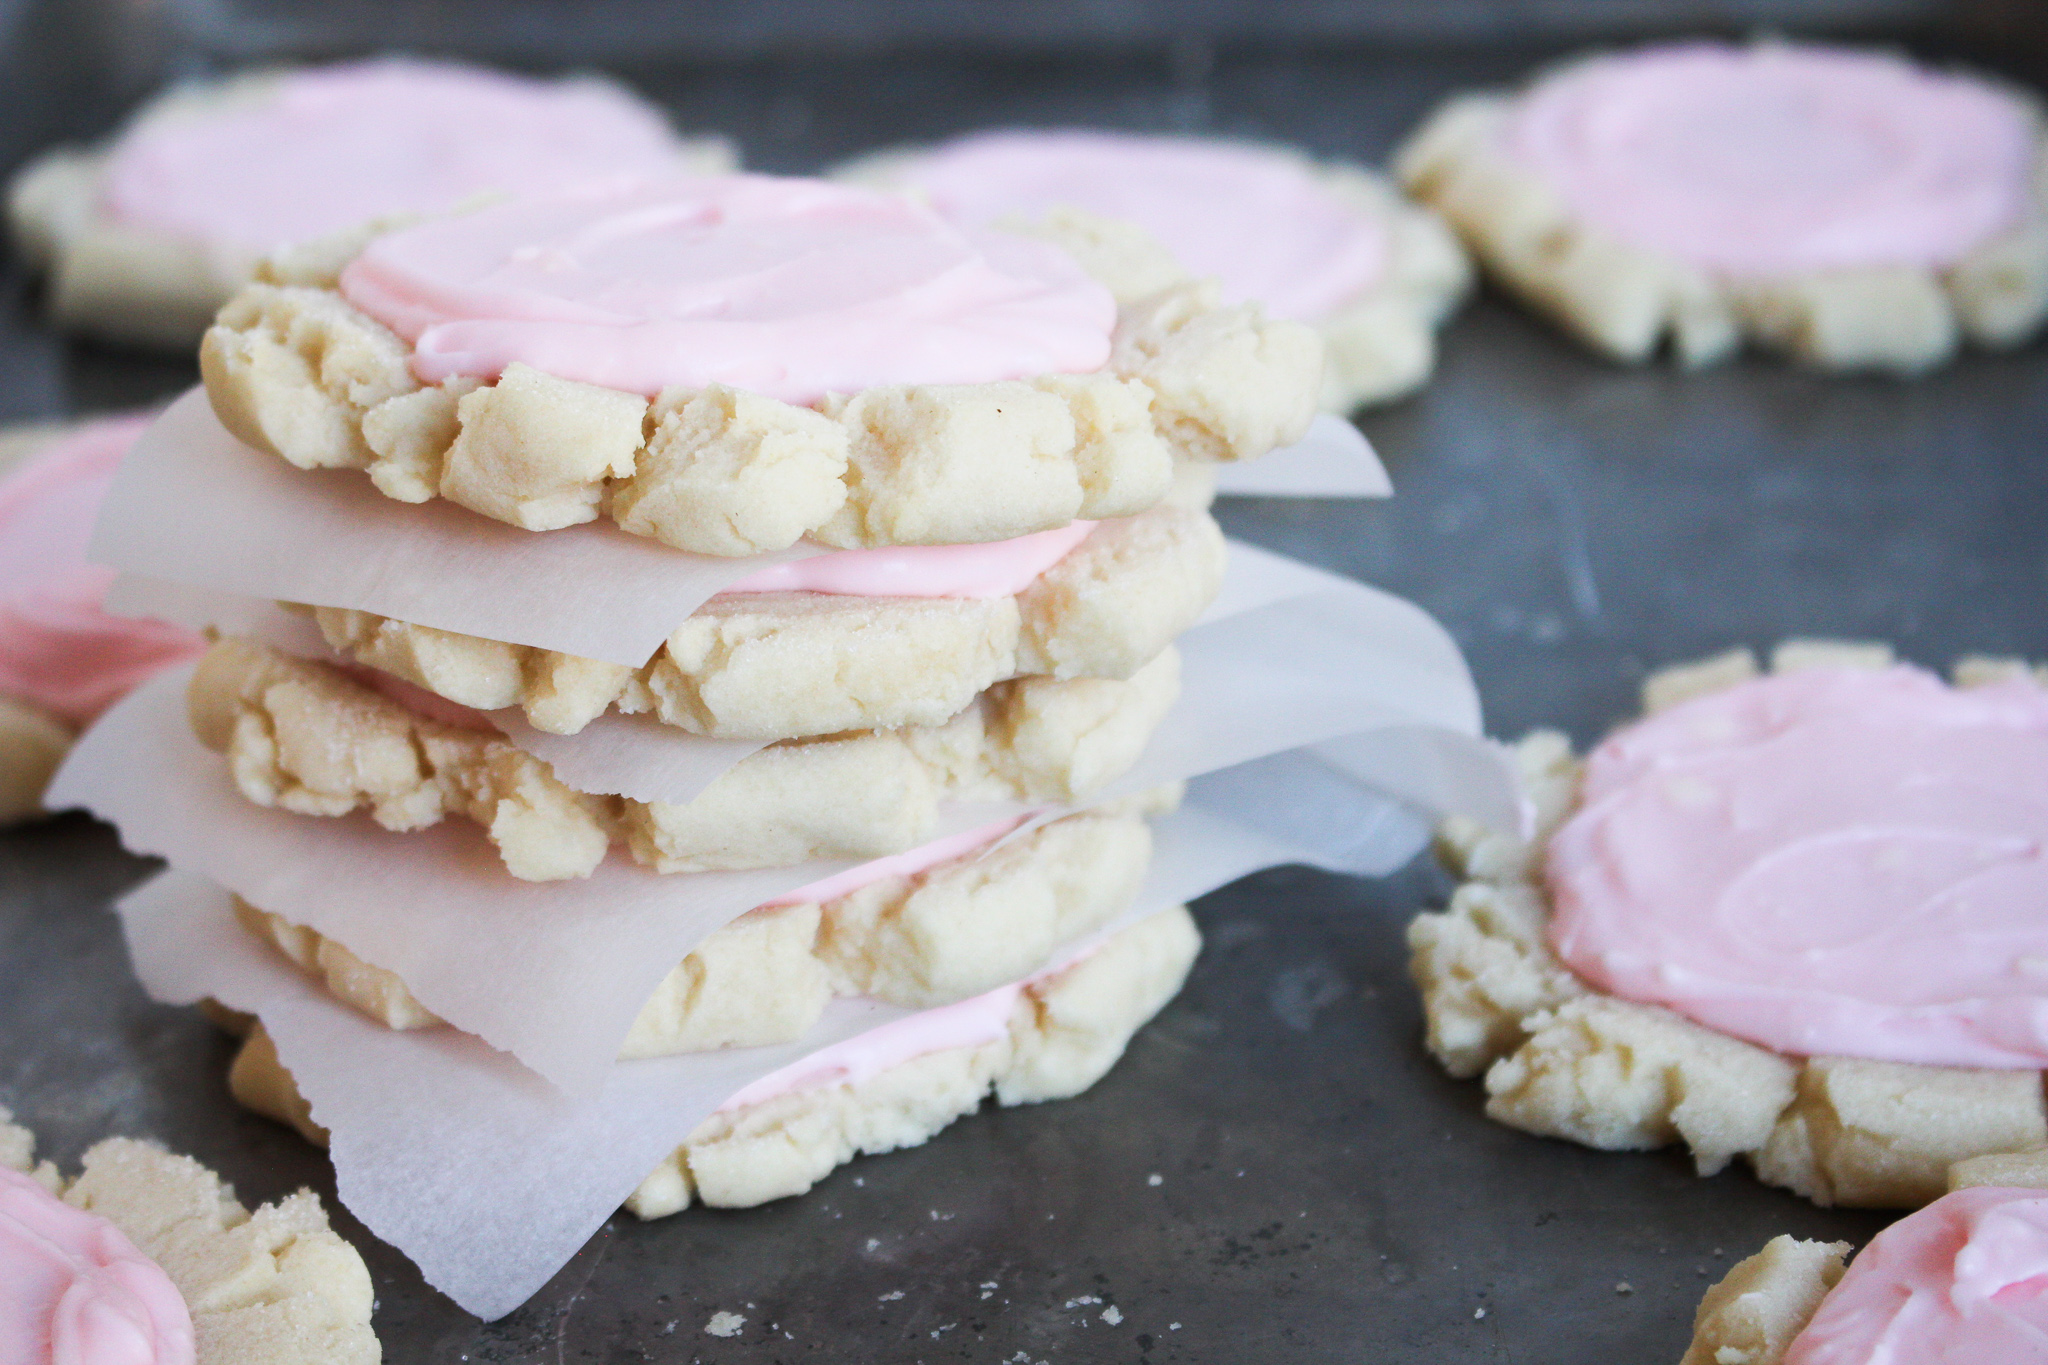 The best sugar cookies out there. These freeze so good too! #stayfitmom #sugarcookierecipe #sugarcookie #pinksugar #recipe #bake